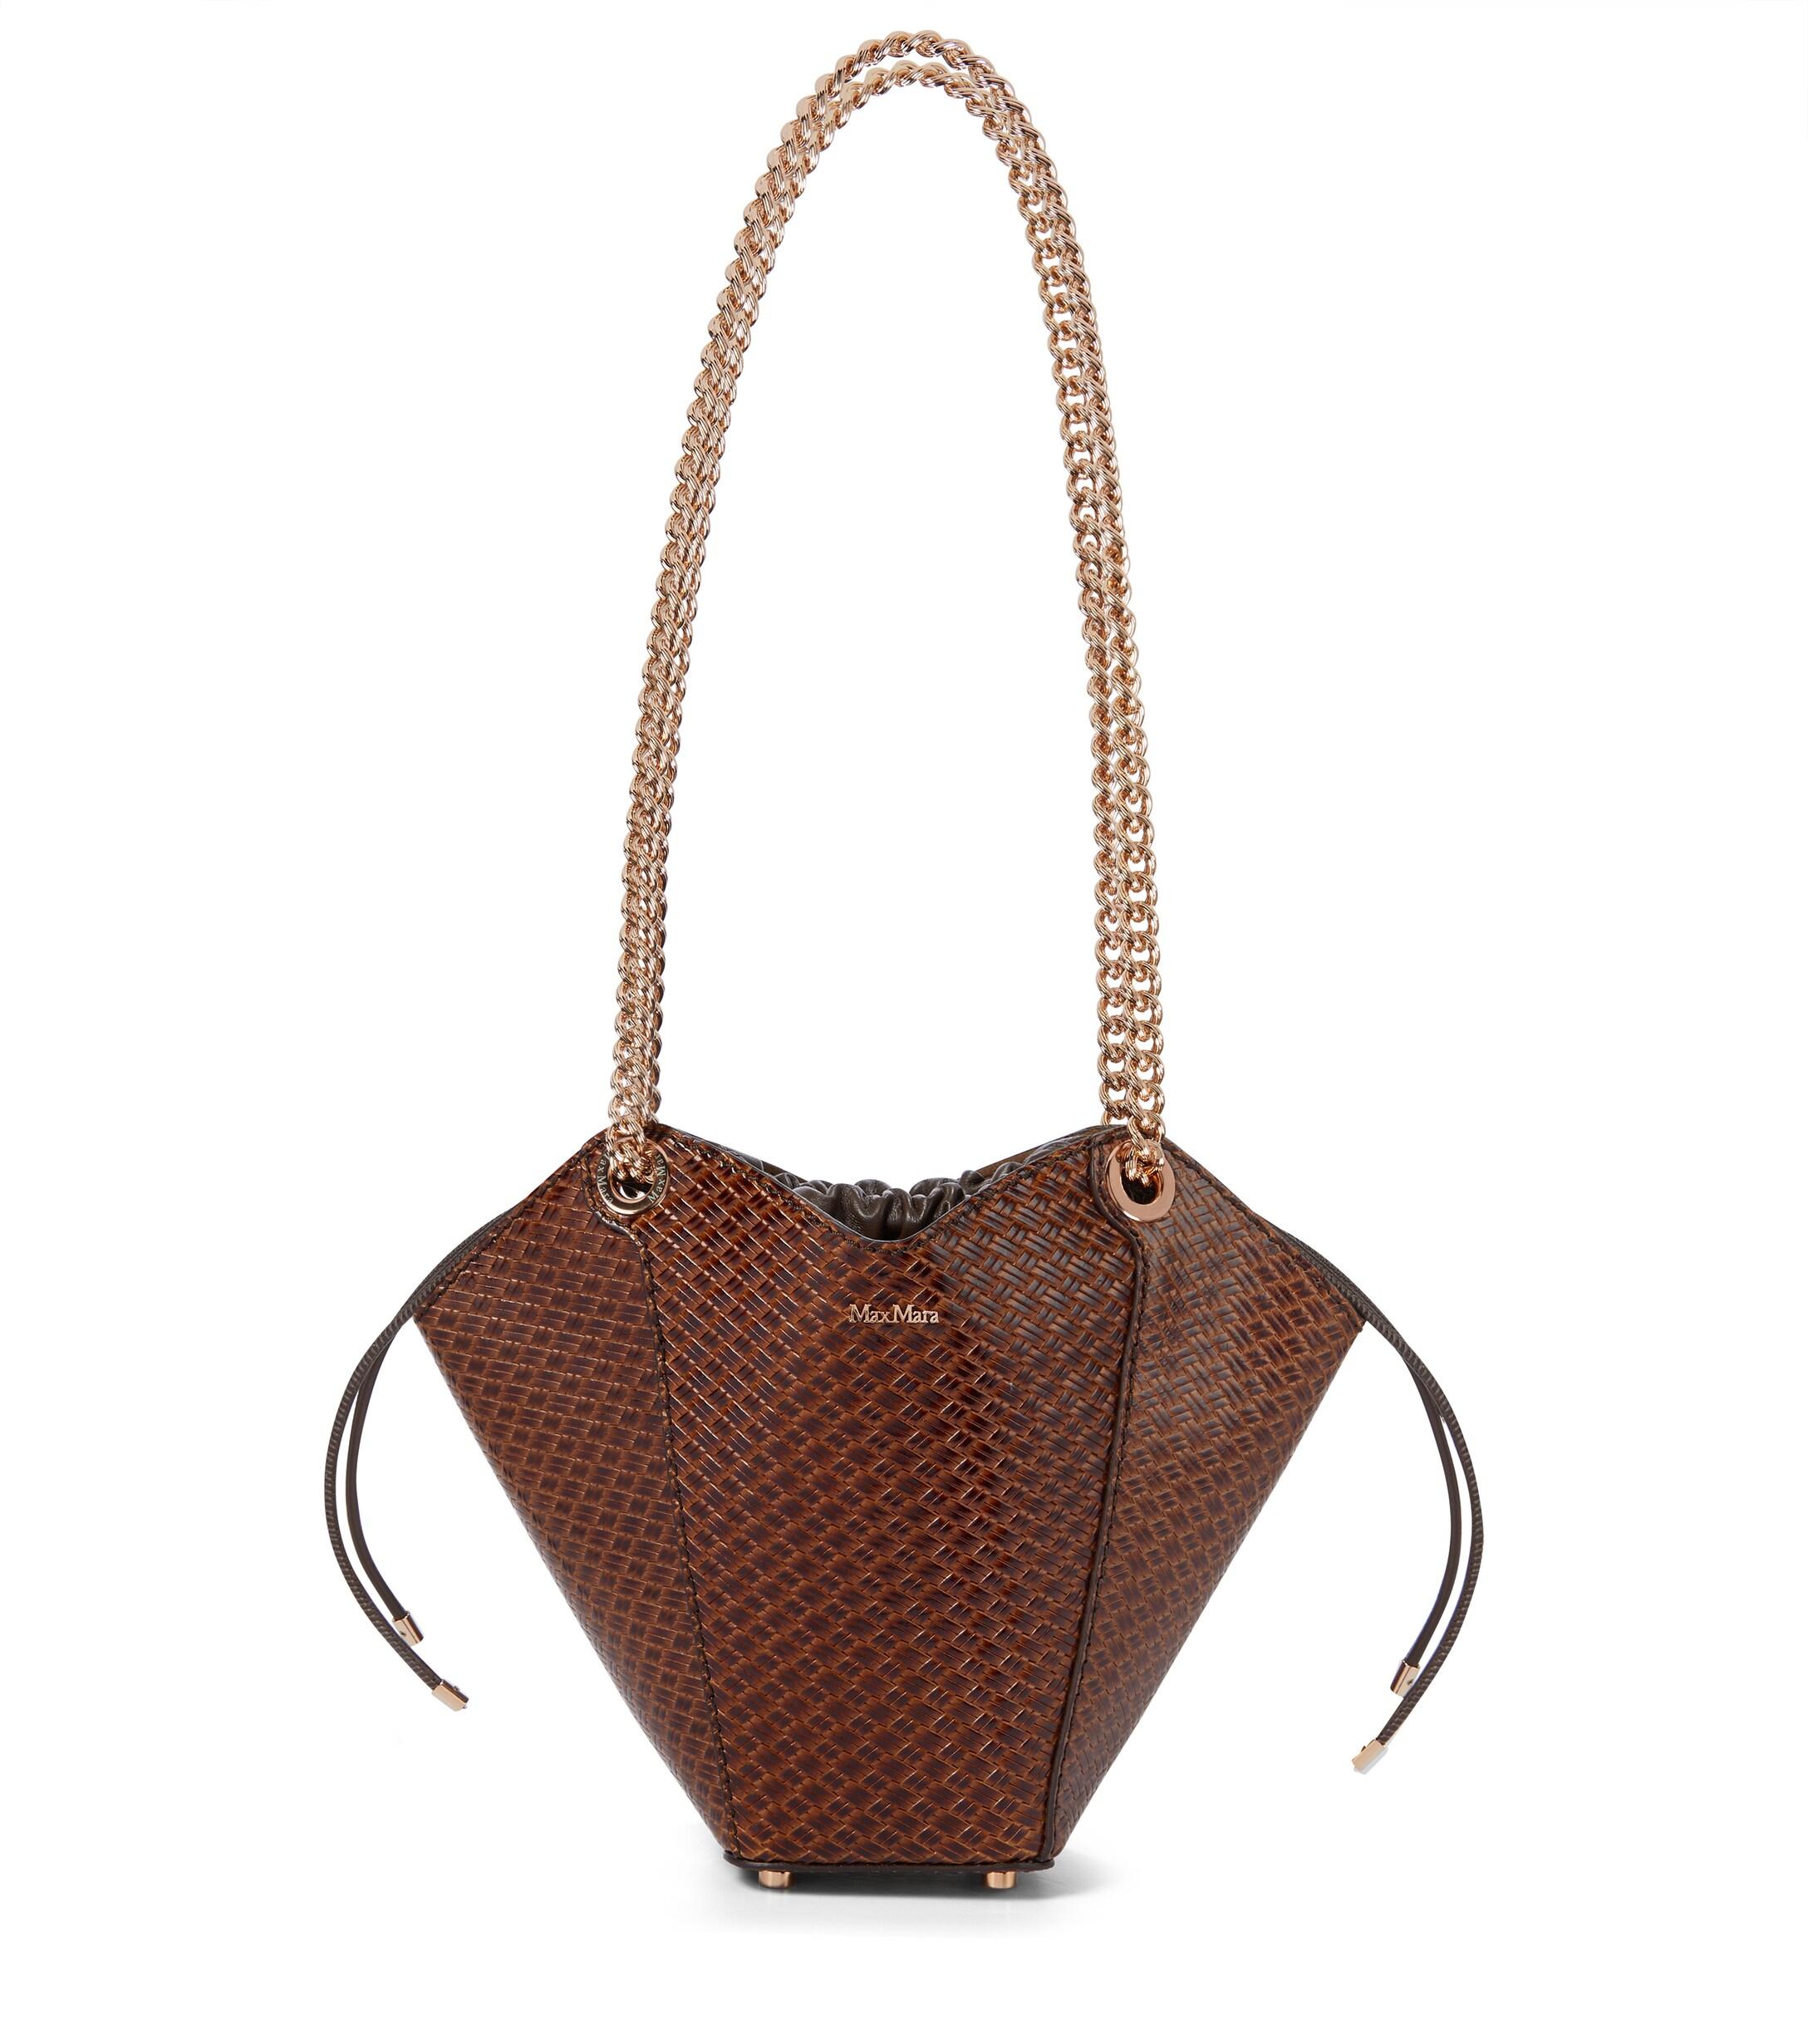 Max Mara Flowers Small Leather Shoulder Bag in Brown | Lyst